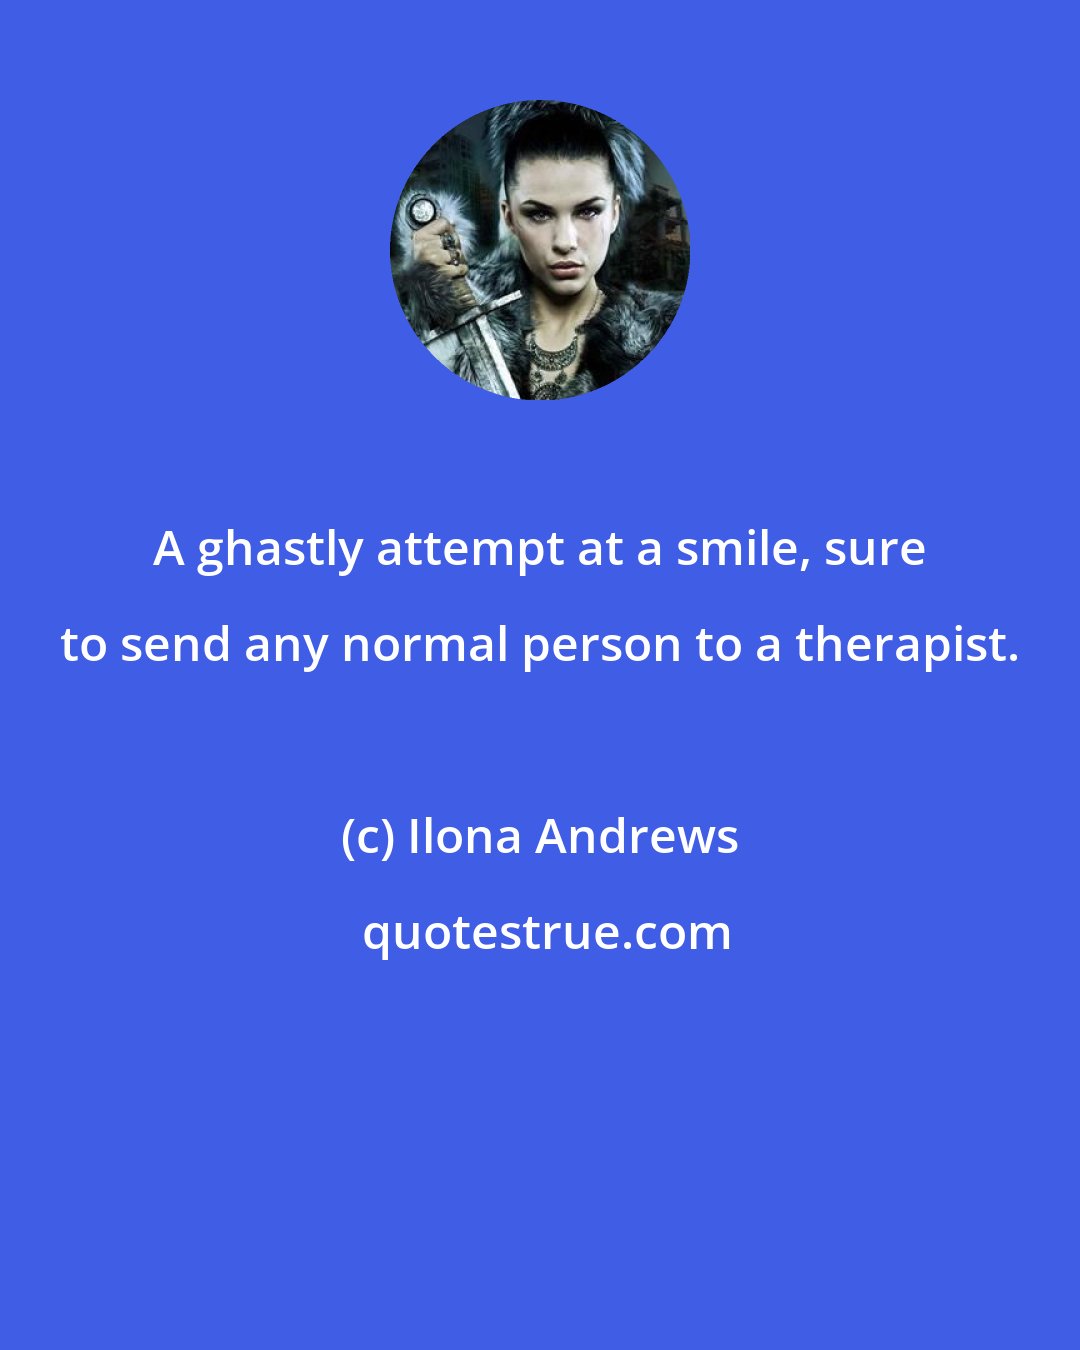 Ilona Andrews: A ghastly attempt at a smile, sure to send any normal person to a therapist.